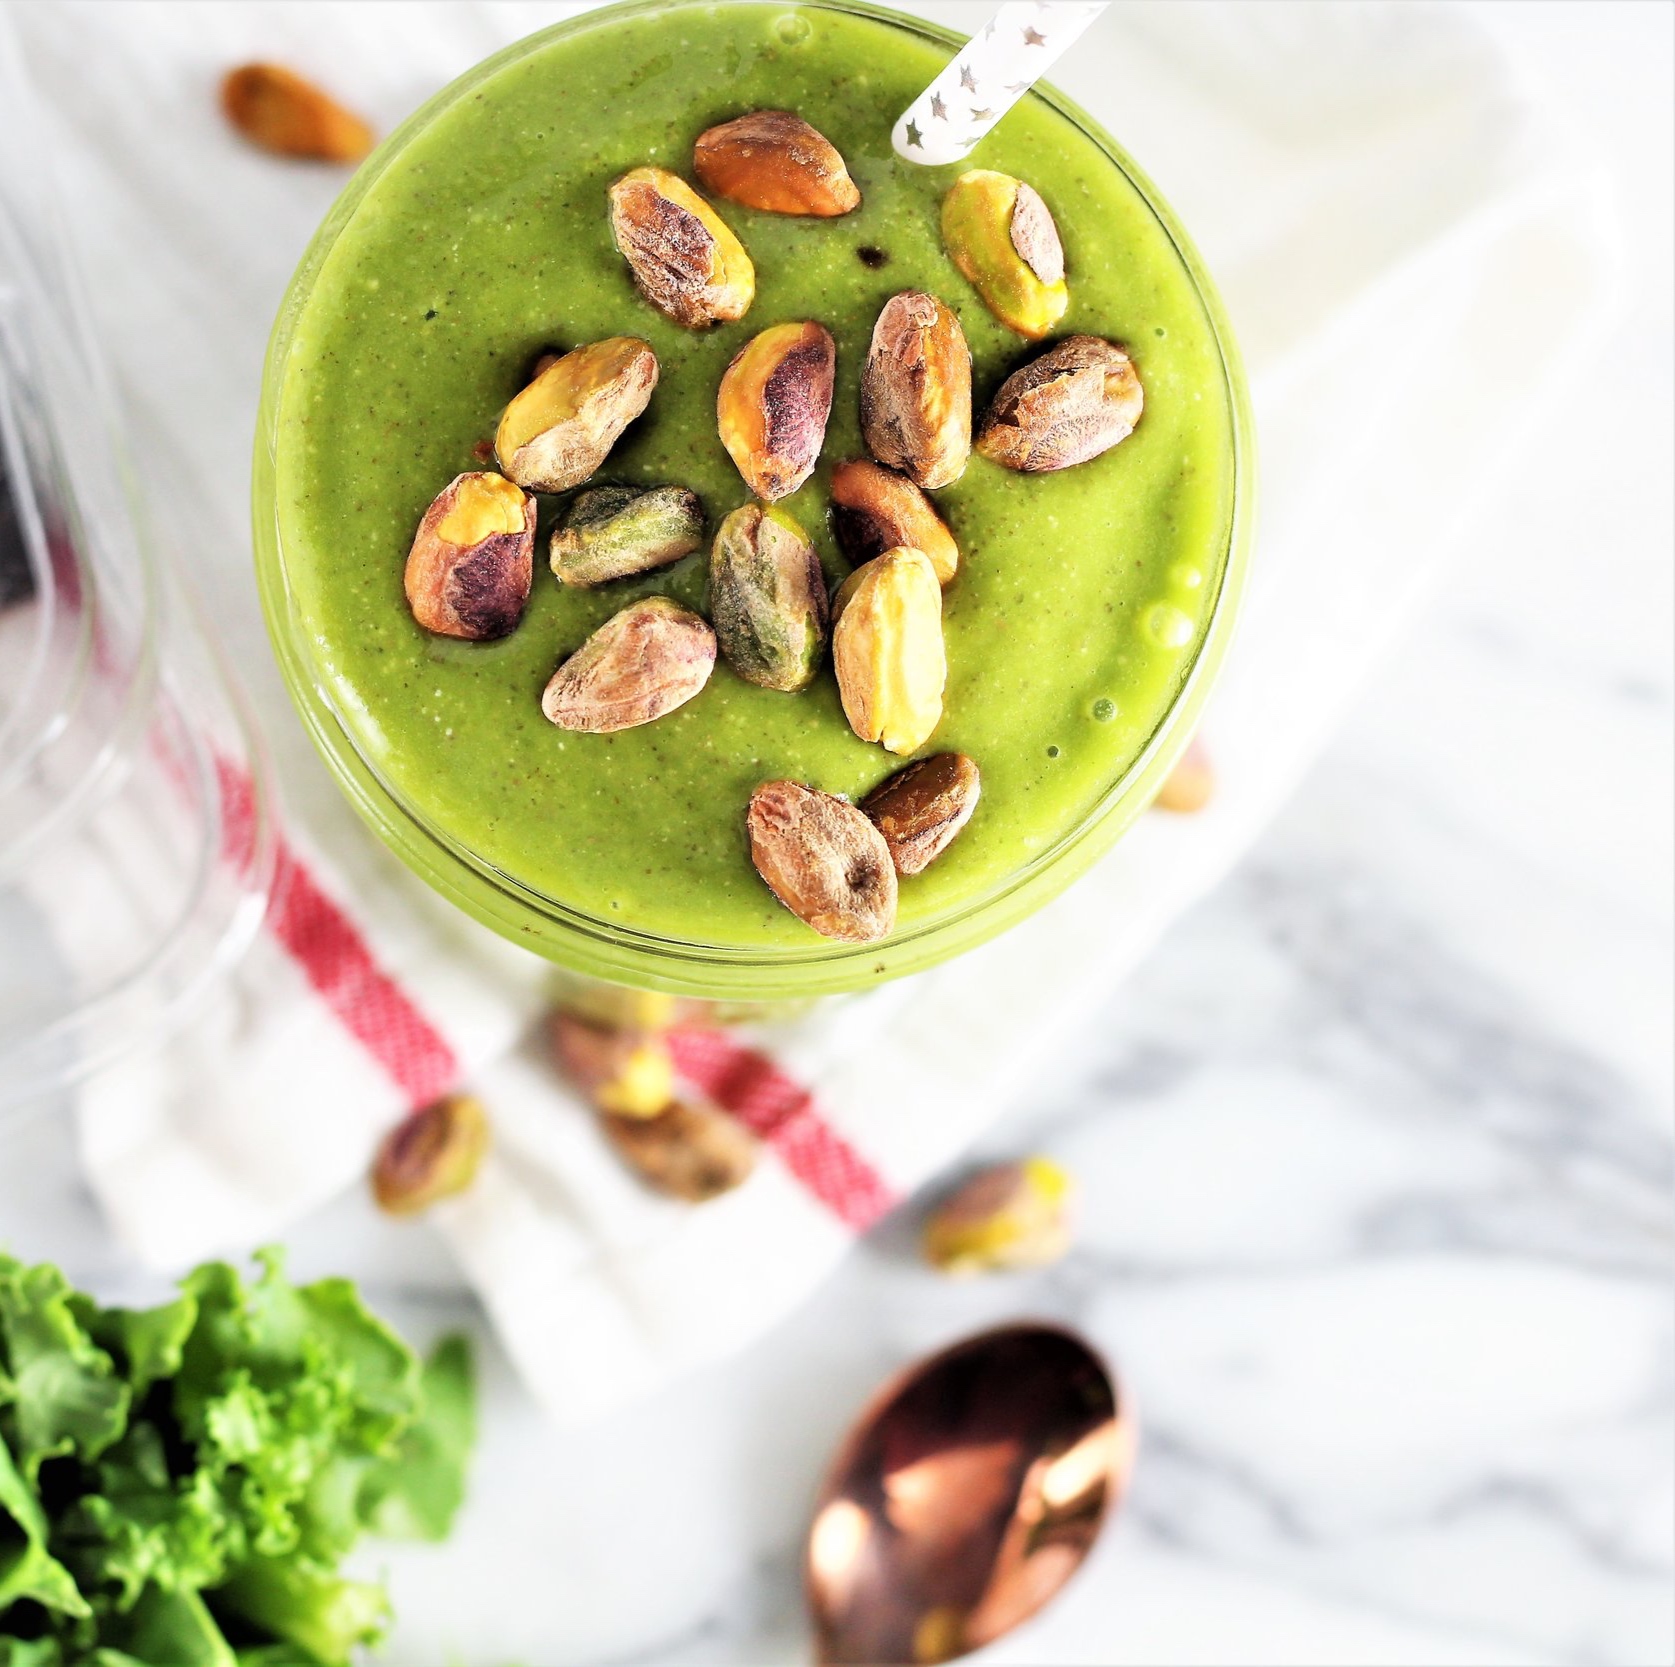   10. Lean Green Smoothie  (10 most popular recipes of 2018)  The first recipe I posted in 2018! 